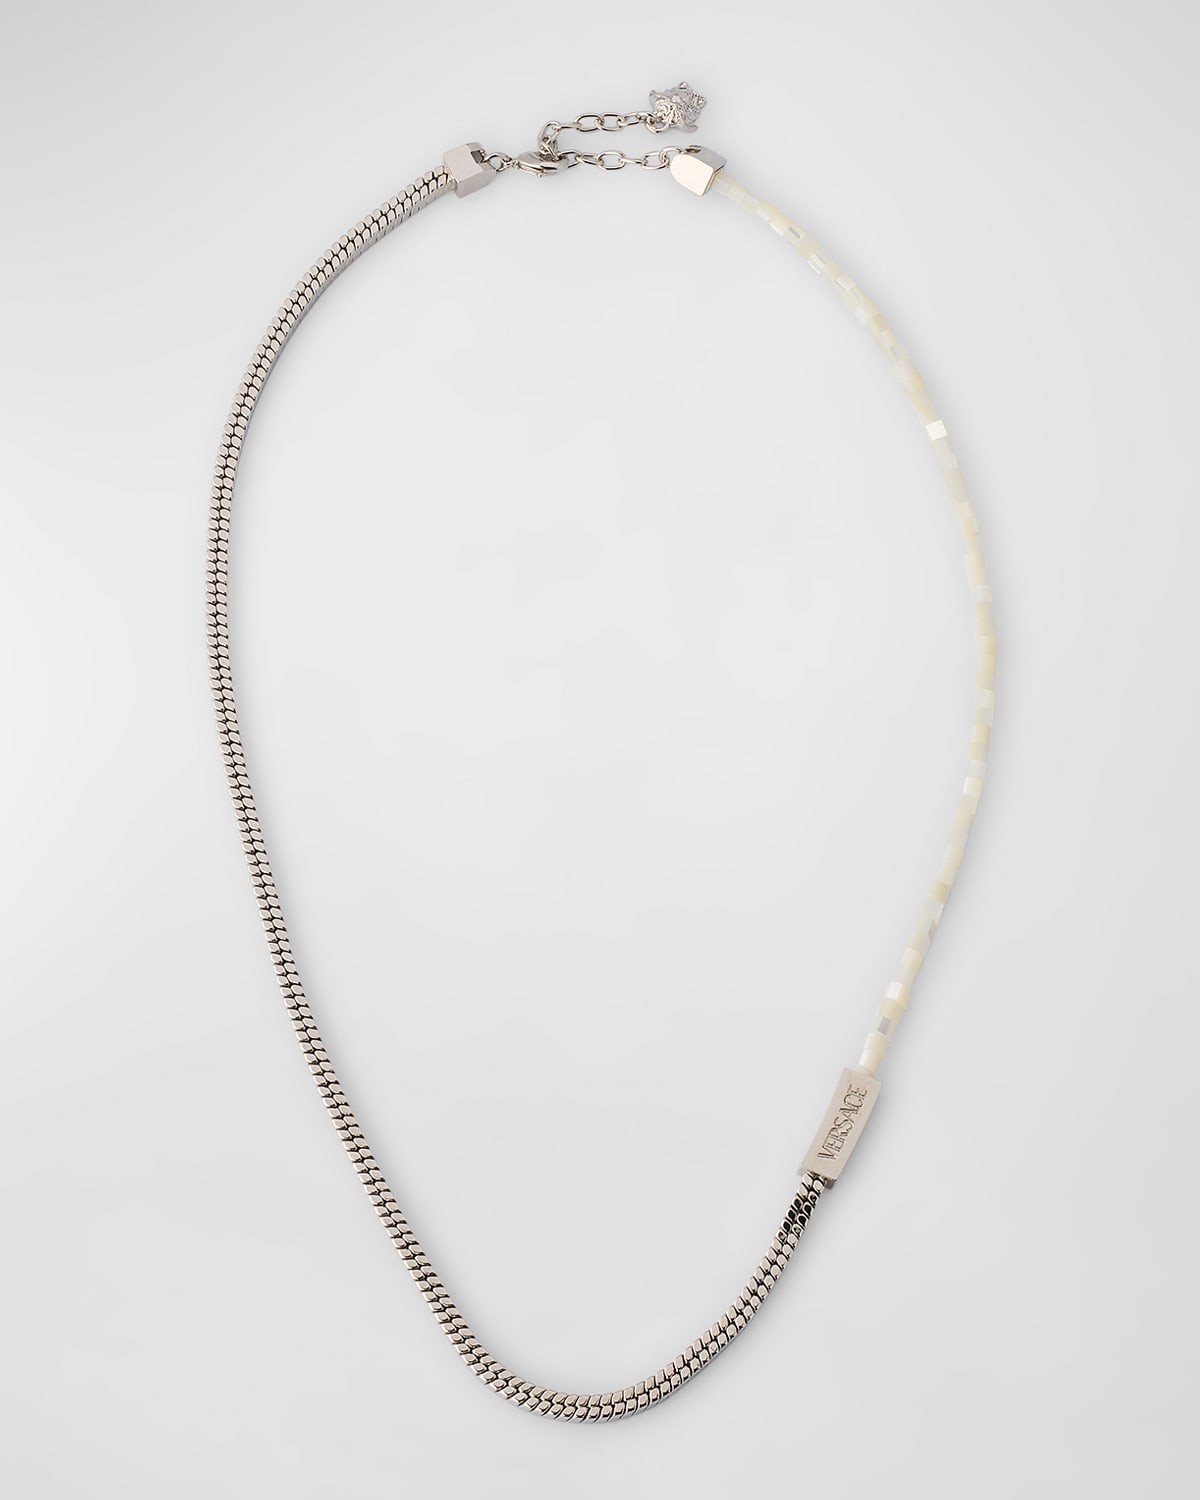 Silvertone Chain and Mother-of-Pearl Bead Necklace